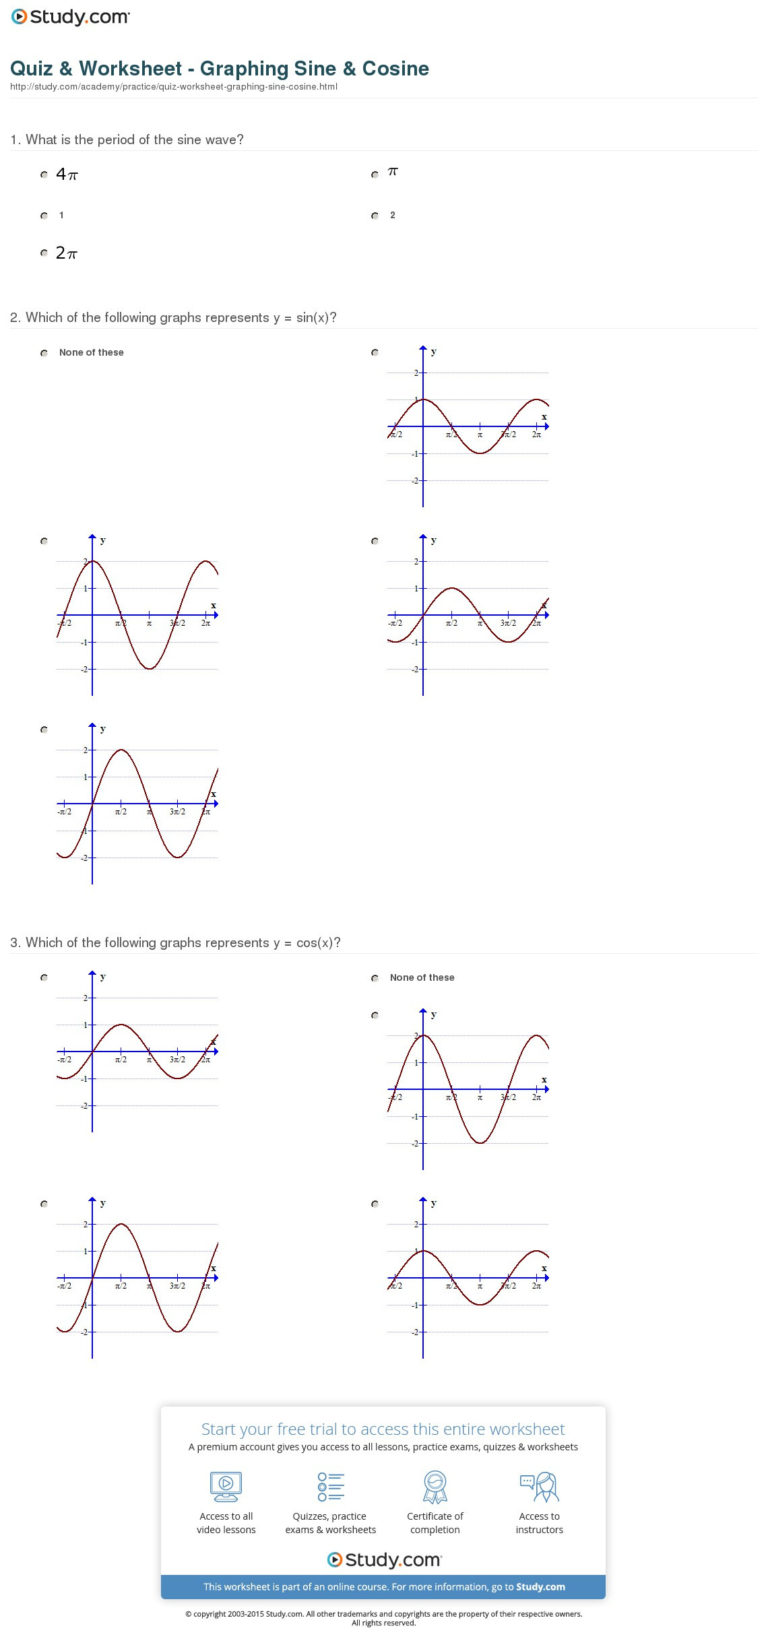 graphing-sine-and-cosine-practice-worksheet-db-excel